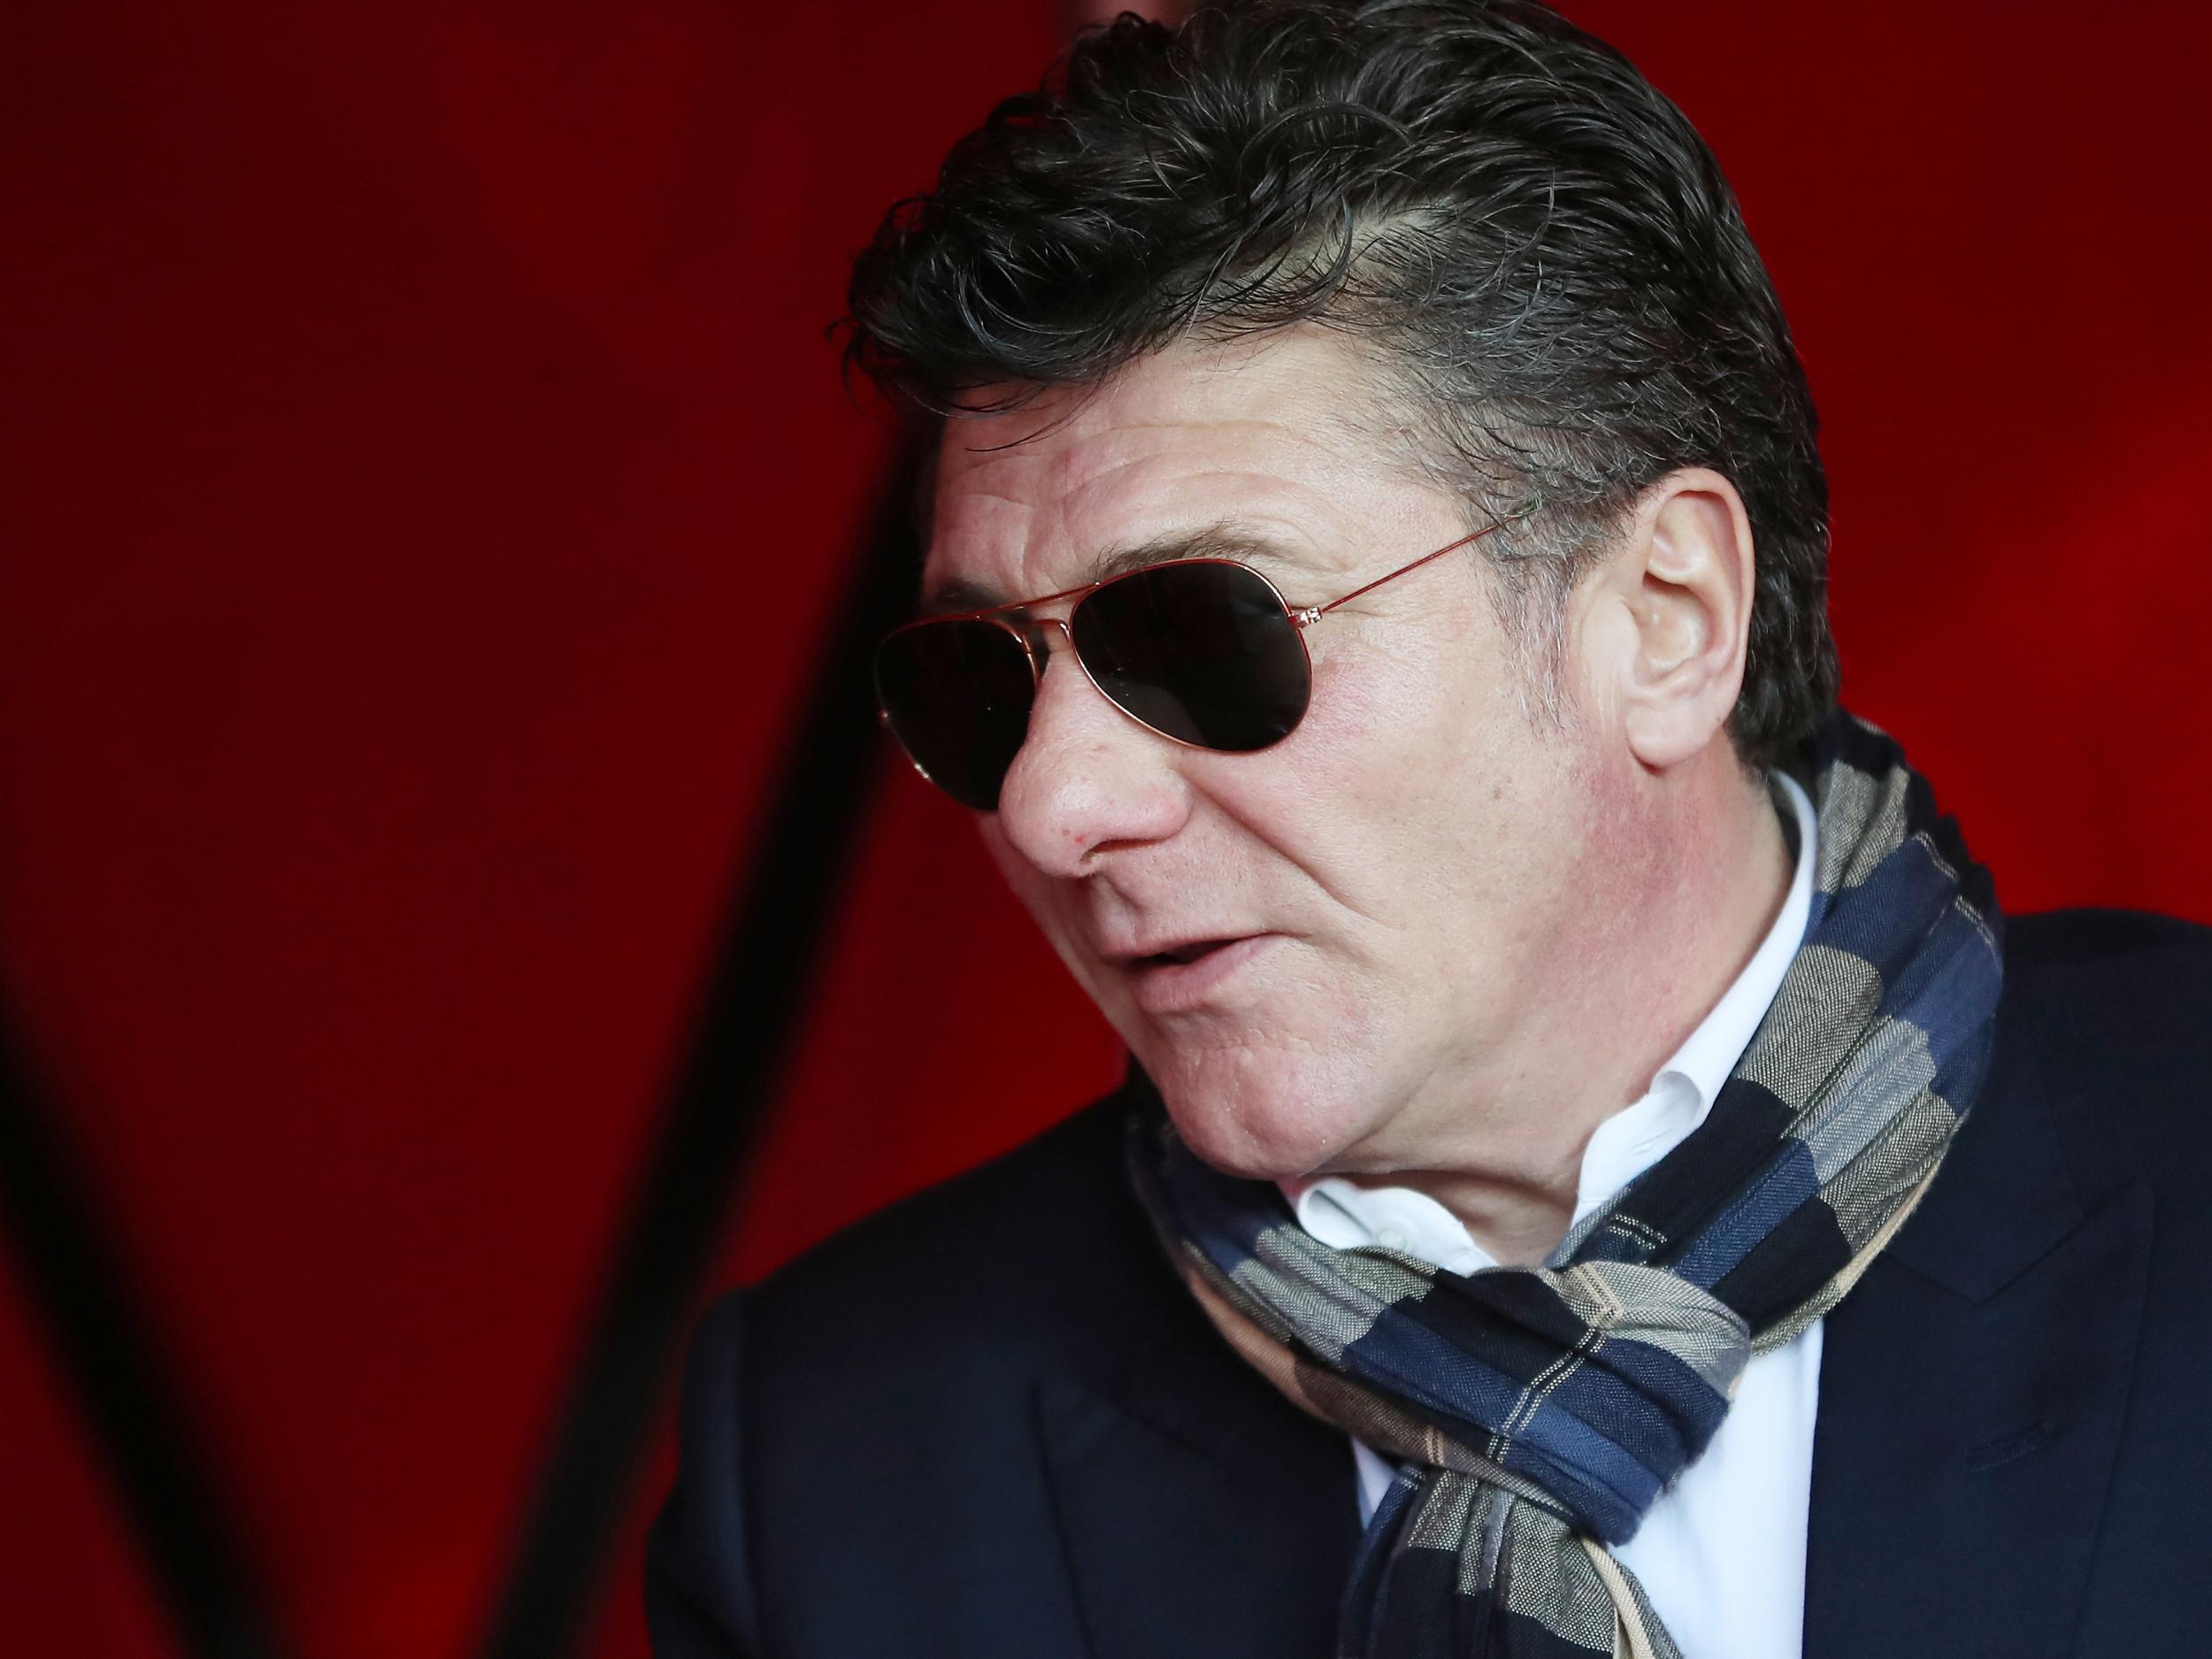 Mazzarri has called on his team to deliver a performance for 'the full 90 minutes' against United